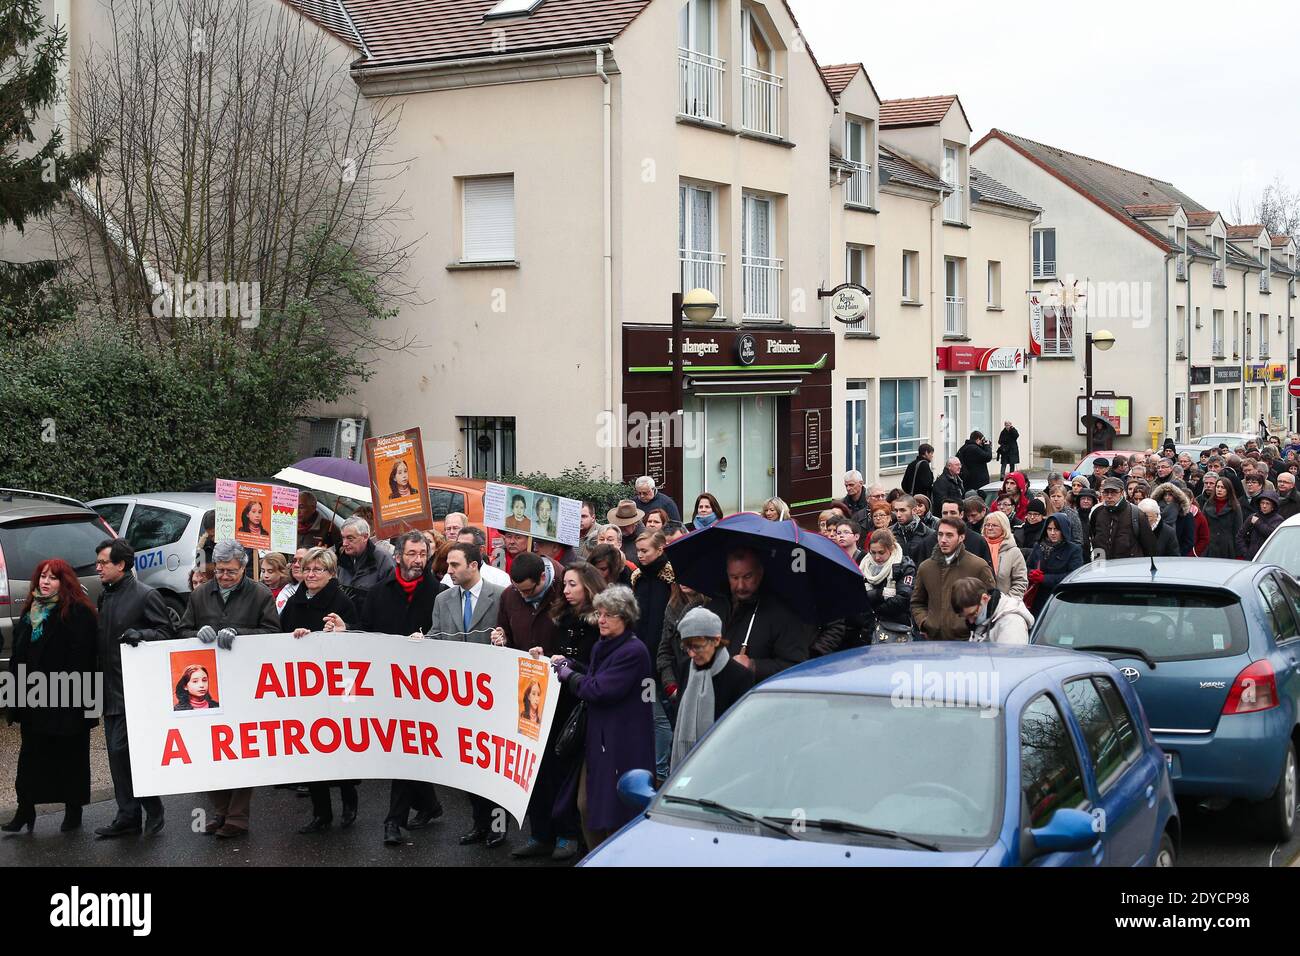 People participate in a march in memory of missing Estelle Mouzin in Guermantes, France on January 13, 2013. Estelle, aged 9, disappeared on her way home from school on Thursday 9th January, 2003. Photo by Audrey Poree/ABACAPRESS.COM Stock Photo